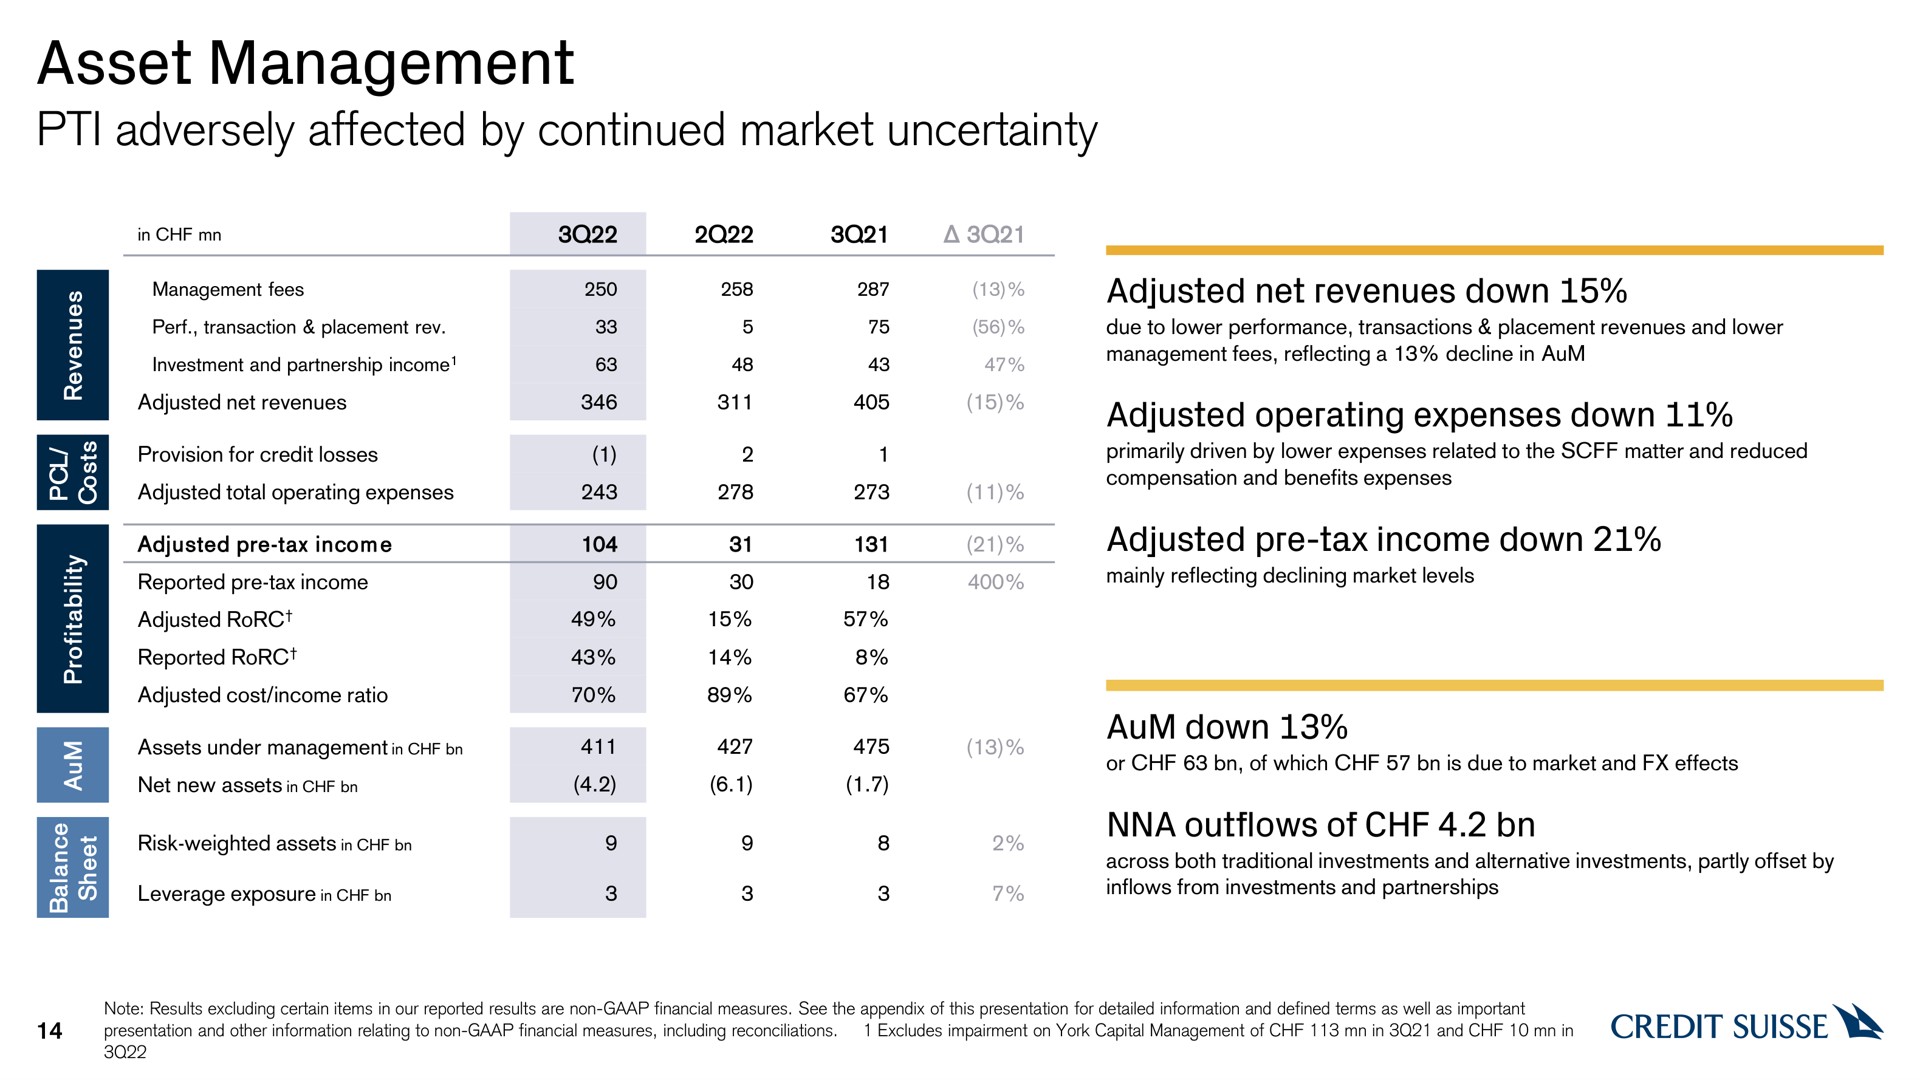 asset management adversely affected by continued market uncertainty | Credit Suisse